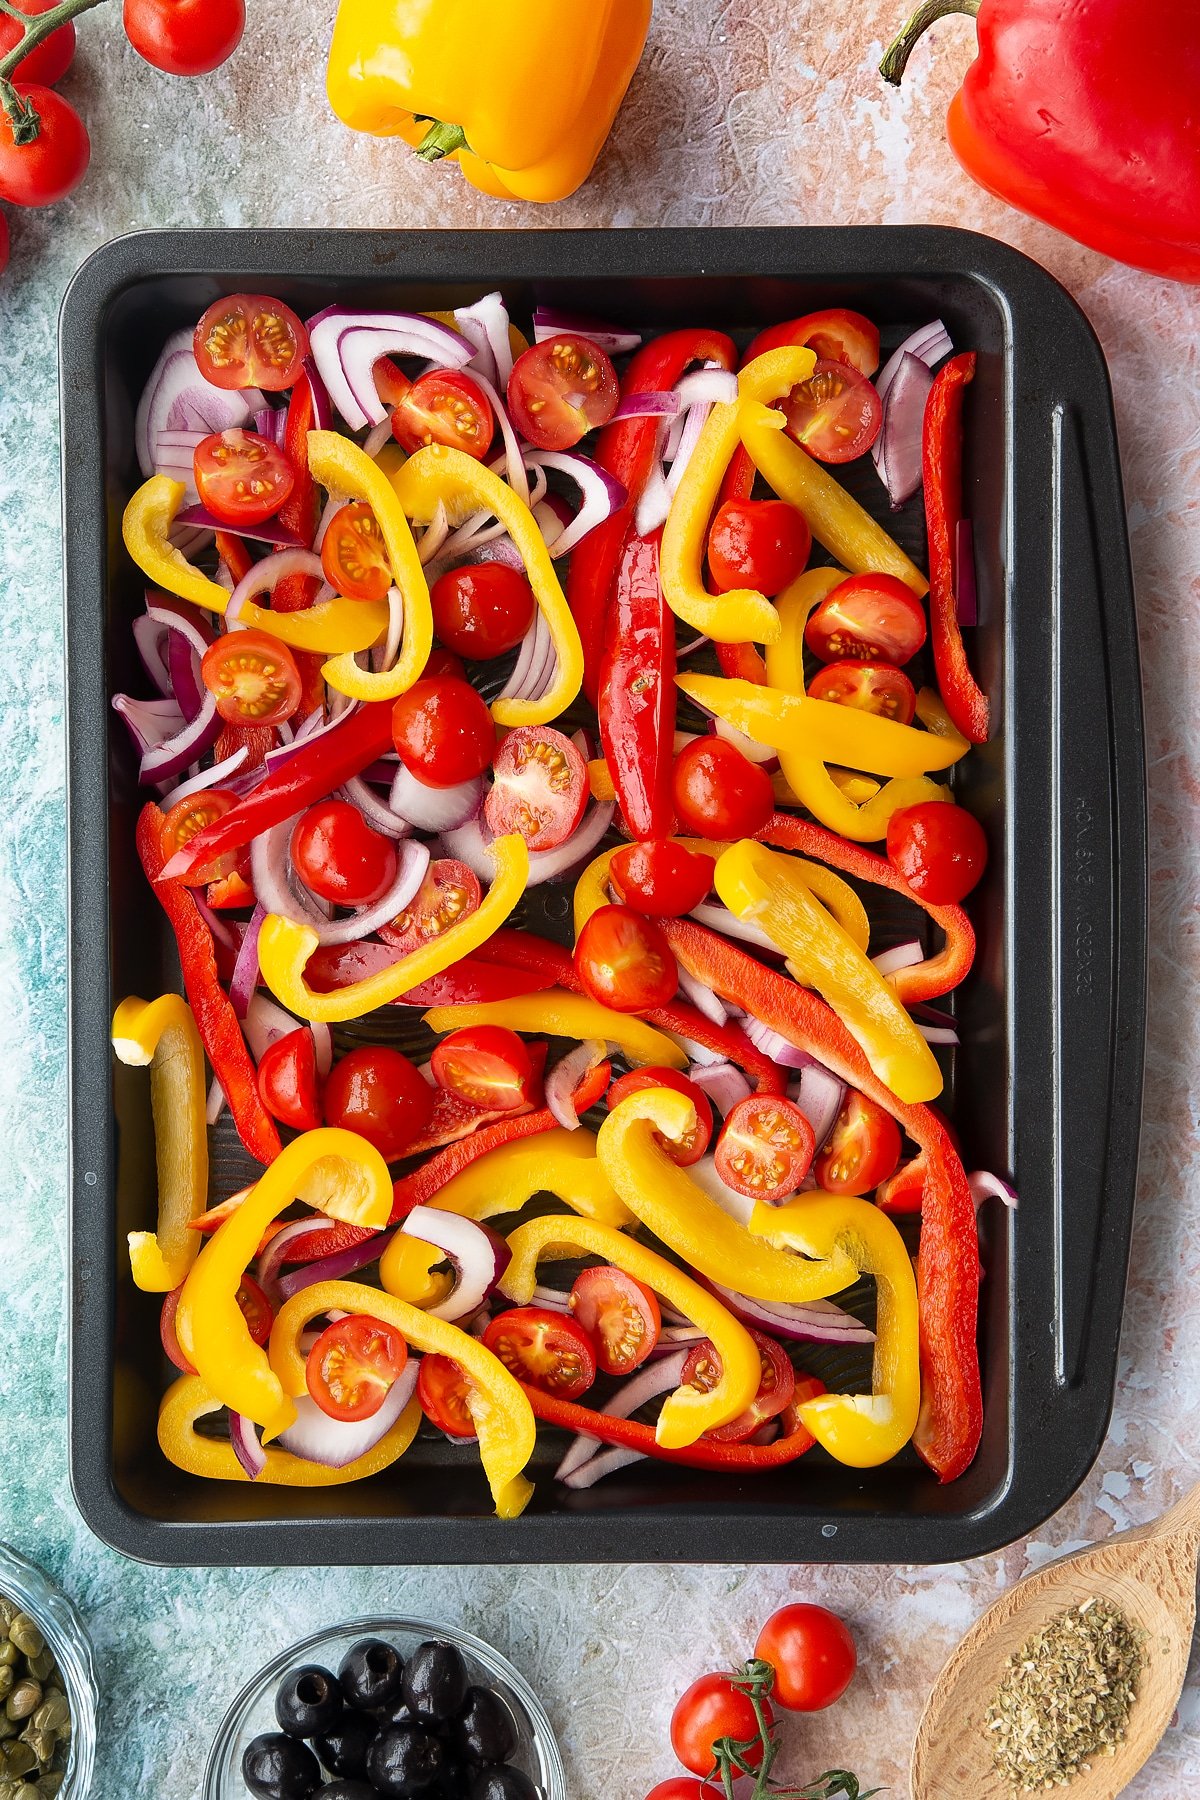 Halved cherry tomatoes, sliced chopped peppers and sliced onions in an oven tray. Ingredients to make vegan lentil salad surround the tray.